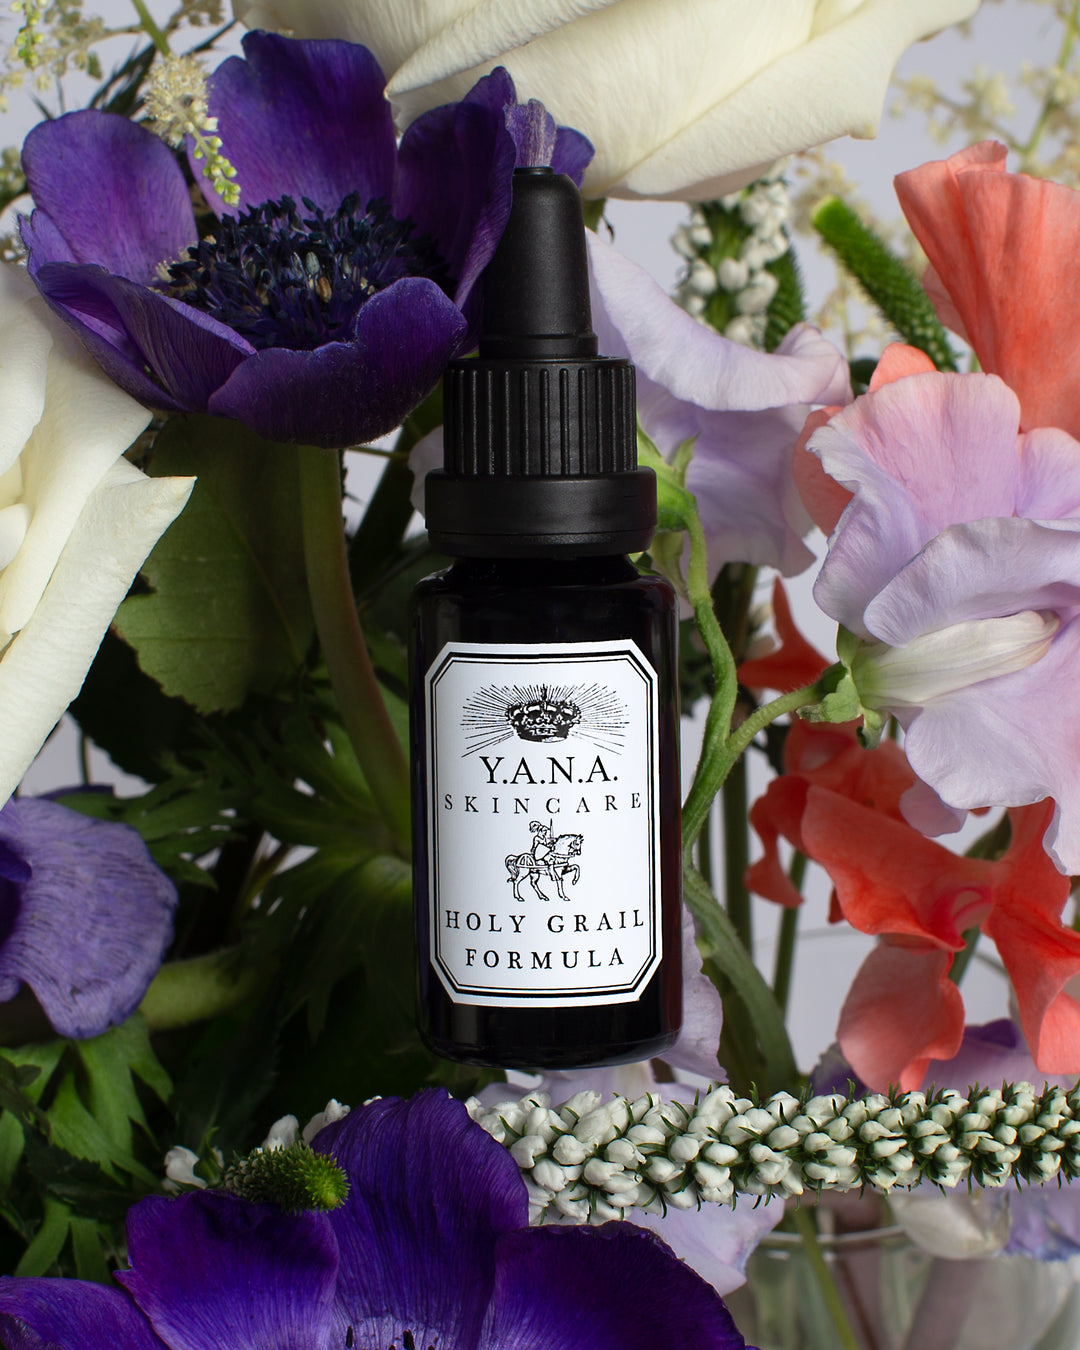 Yana Skincare Face Serum bottle floating above variously colored exotic flowers.